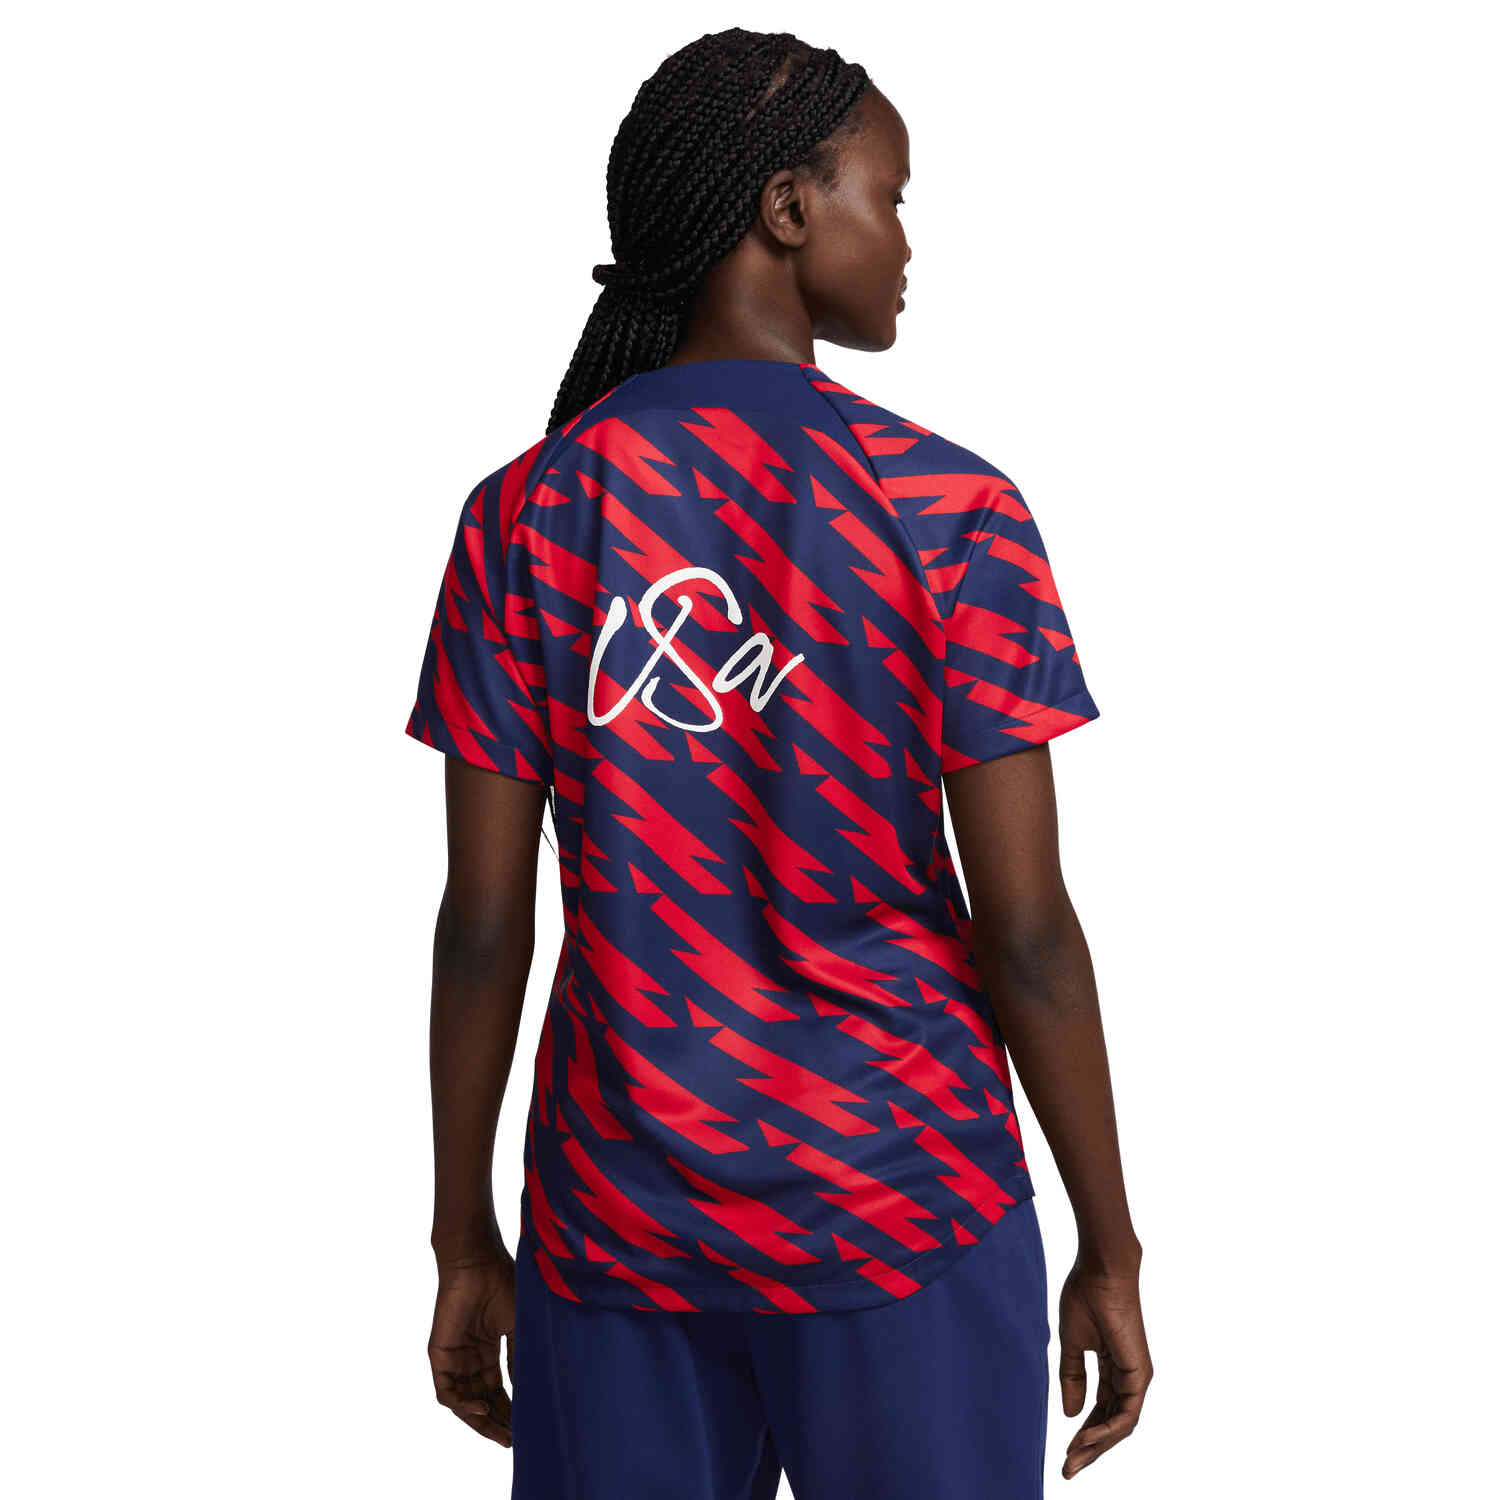 2023 Nike USWNT (4-Star) Home Jersey - Soccer Master